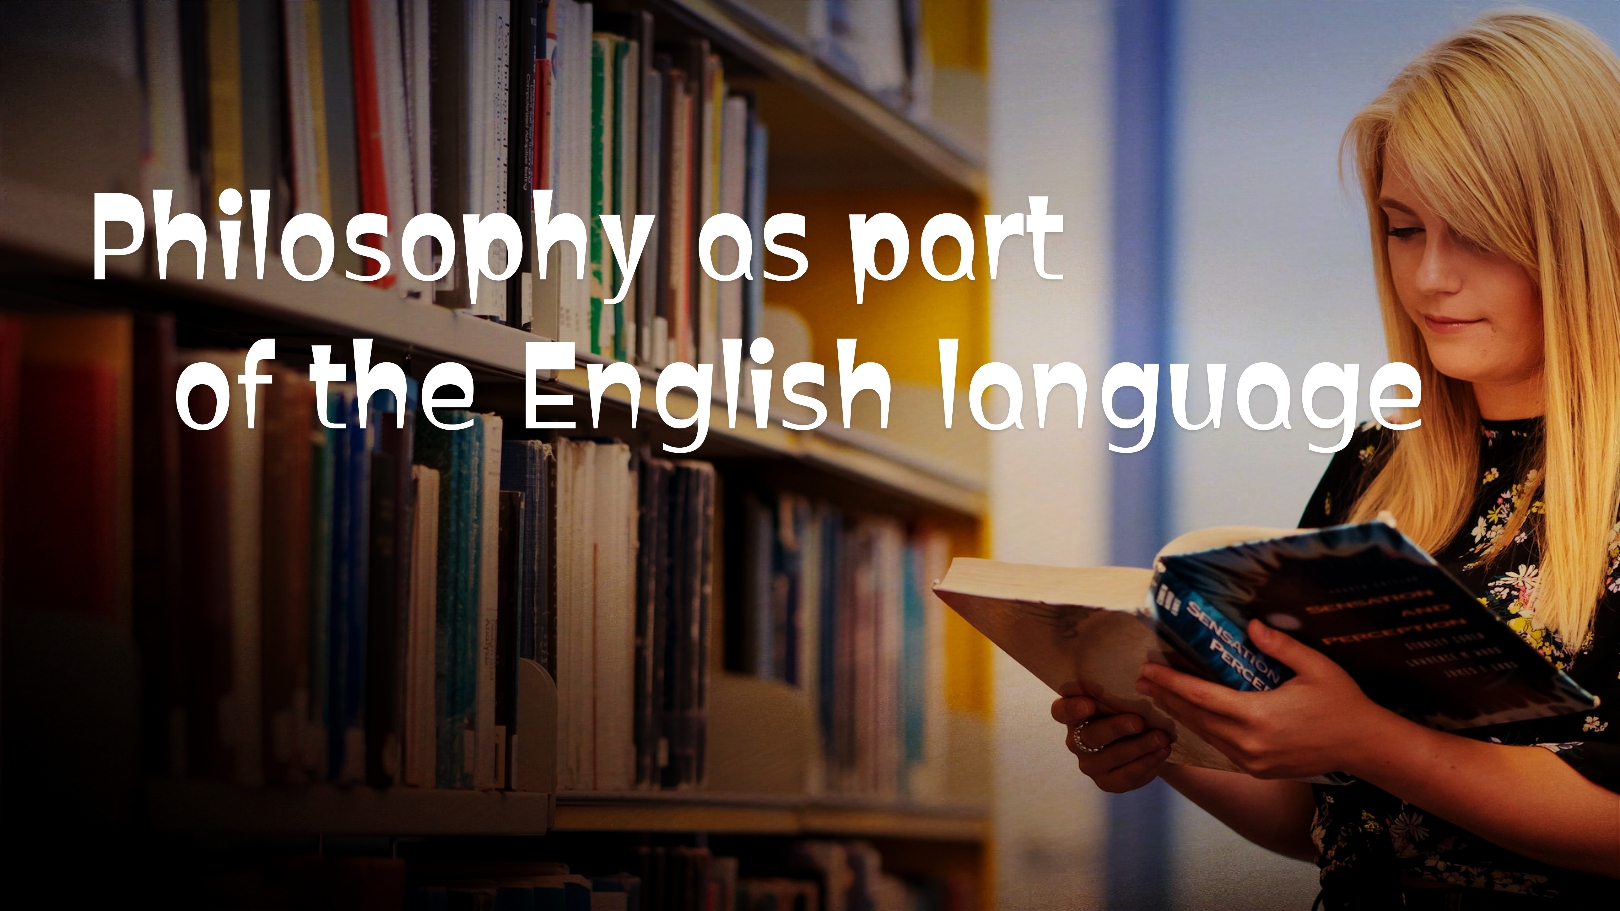 Is philosophy part of the English language?